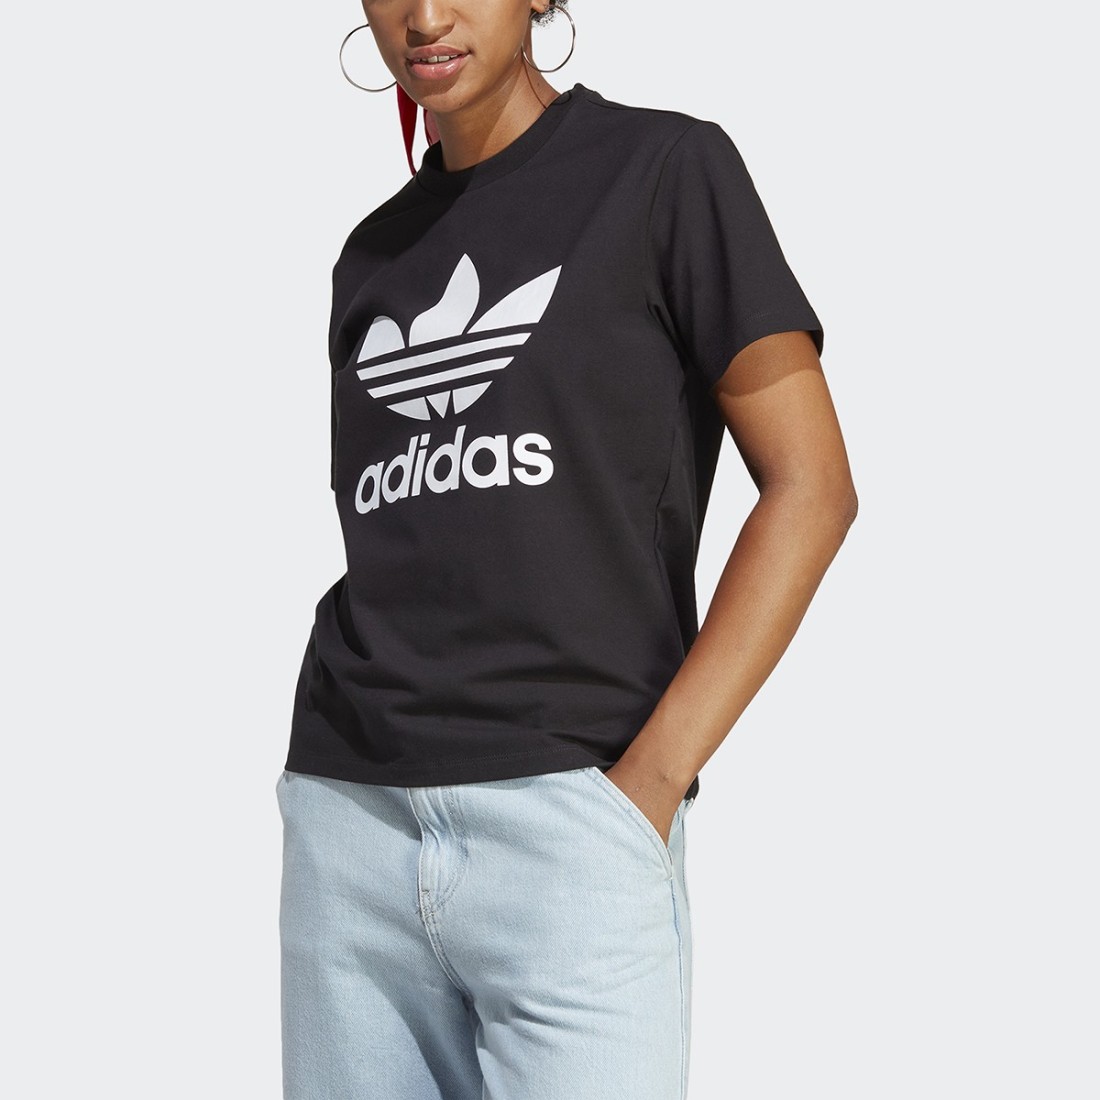 Discover new collection t-shirts by now available online Adidas Originals